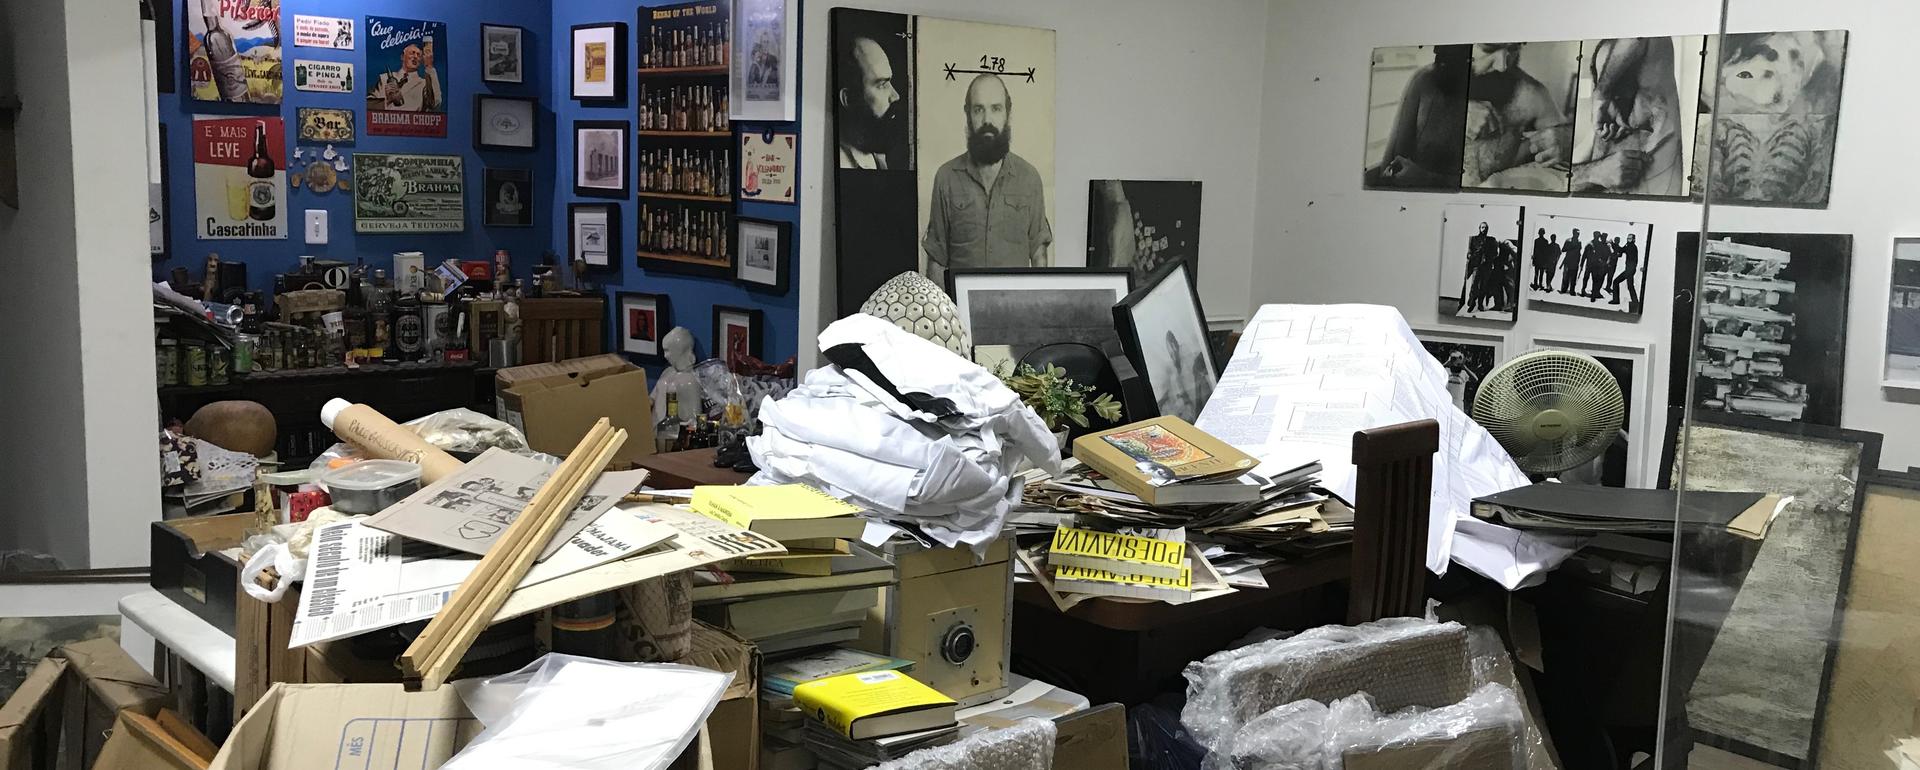 Studio and Archive of Paulo Bruscky